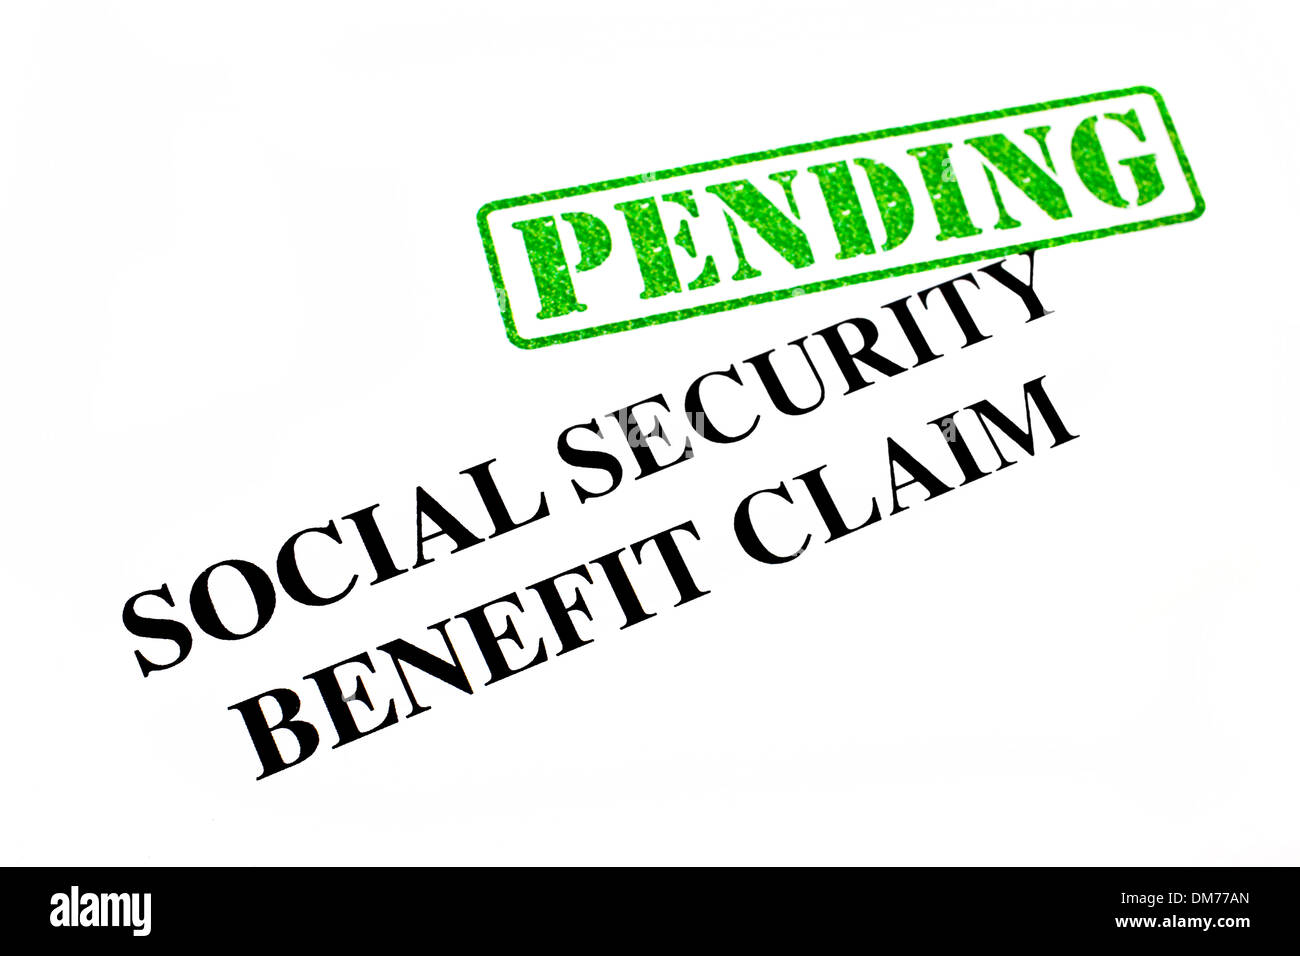 Social Security Benefit Claim in PENDING. Stock Photo